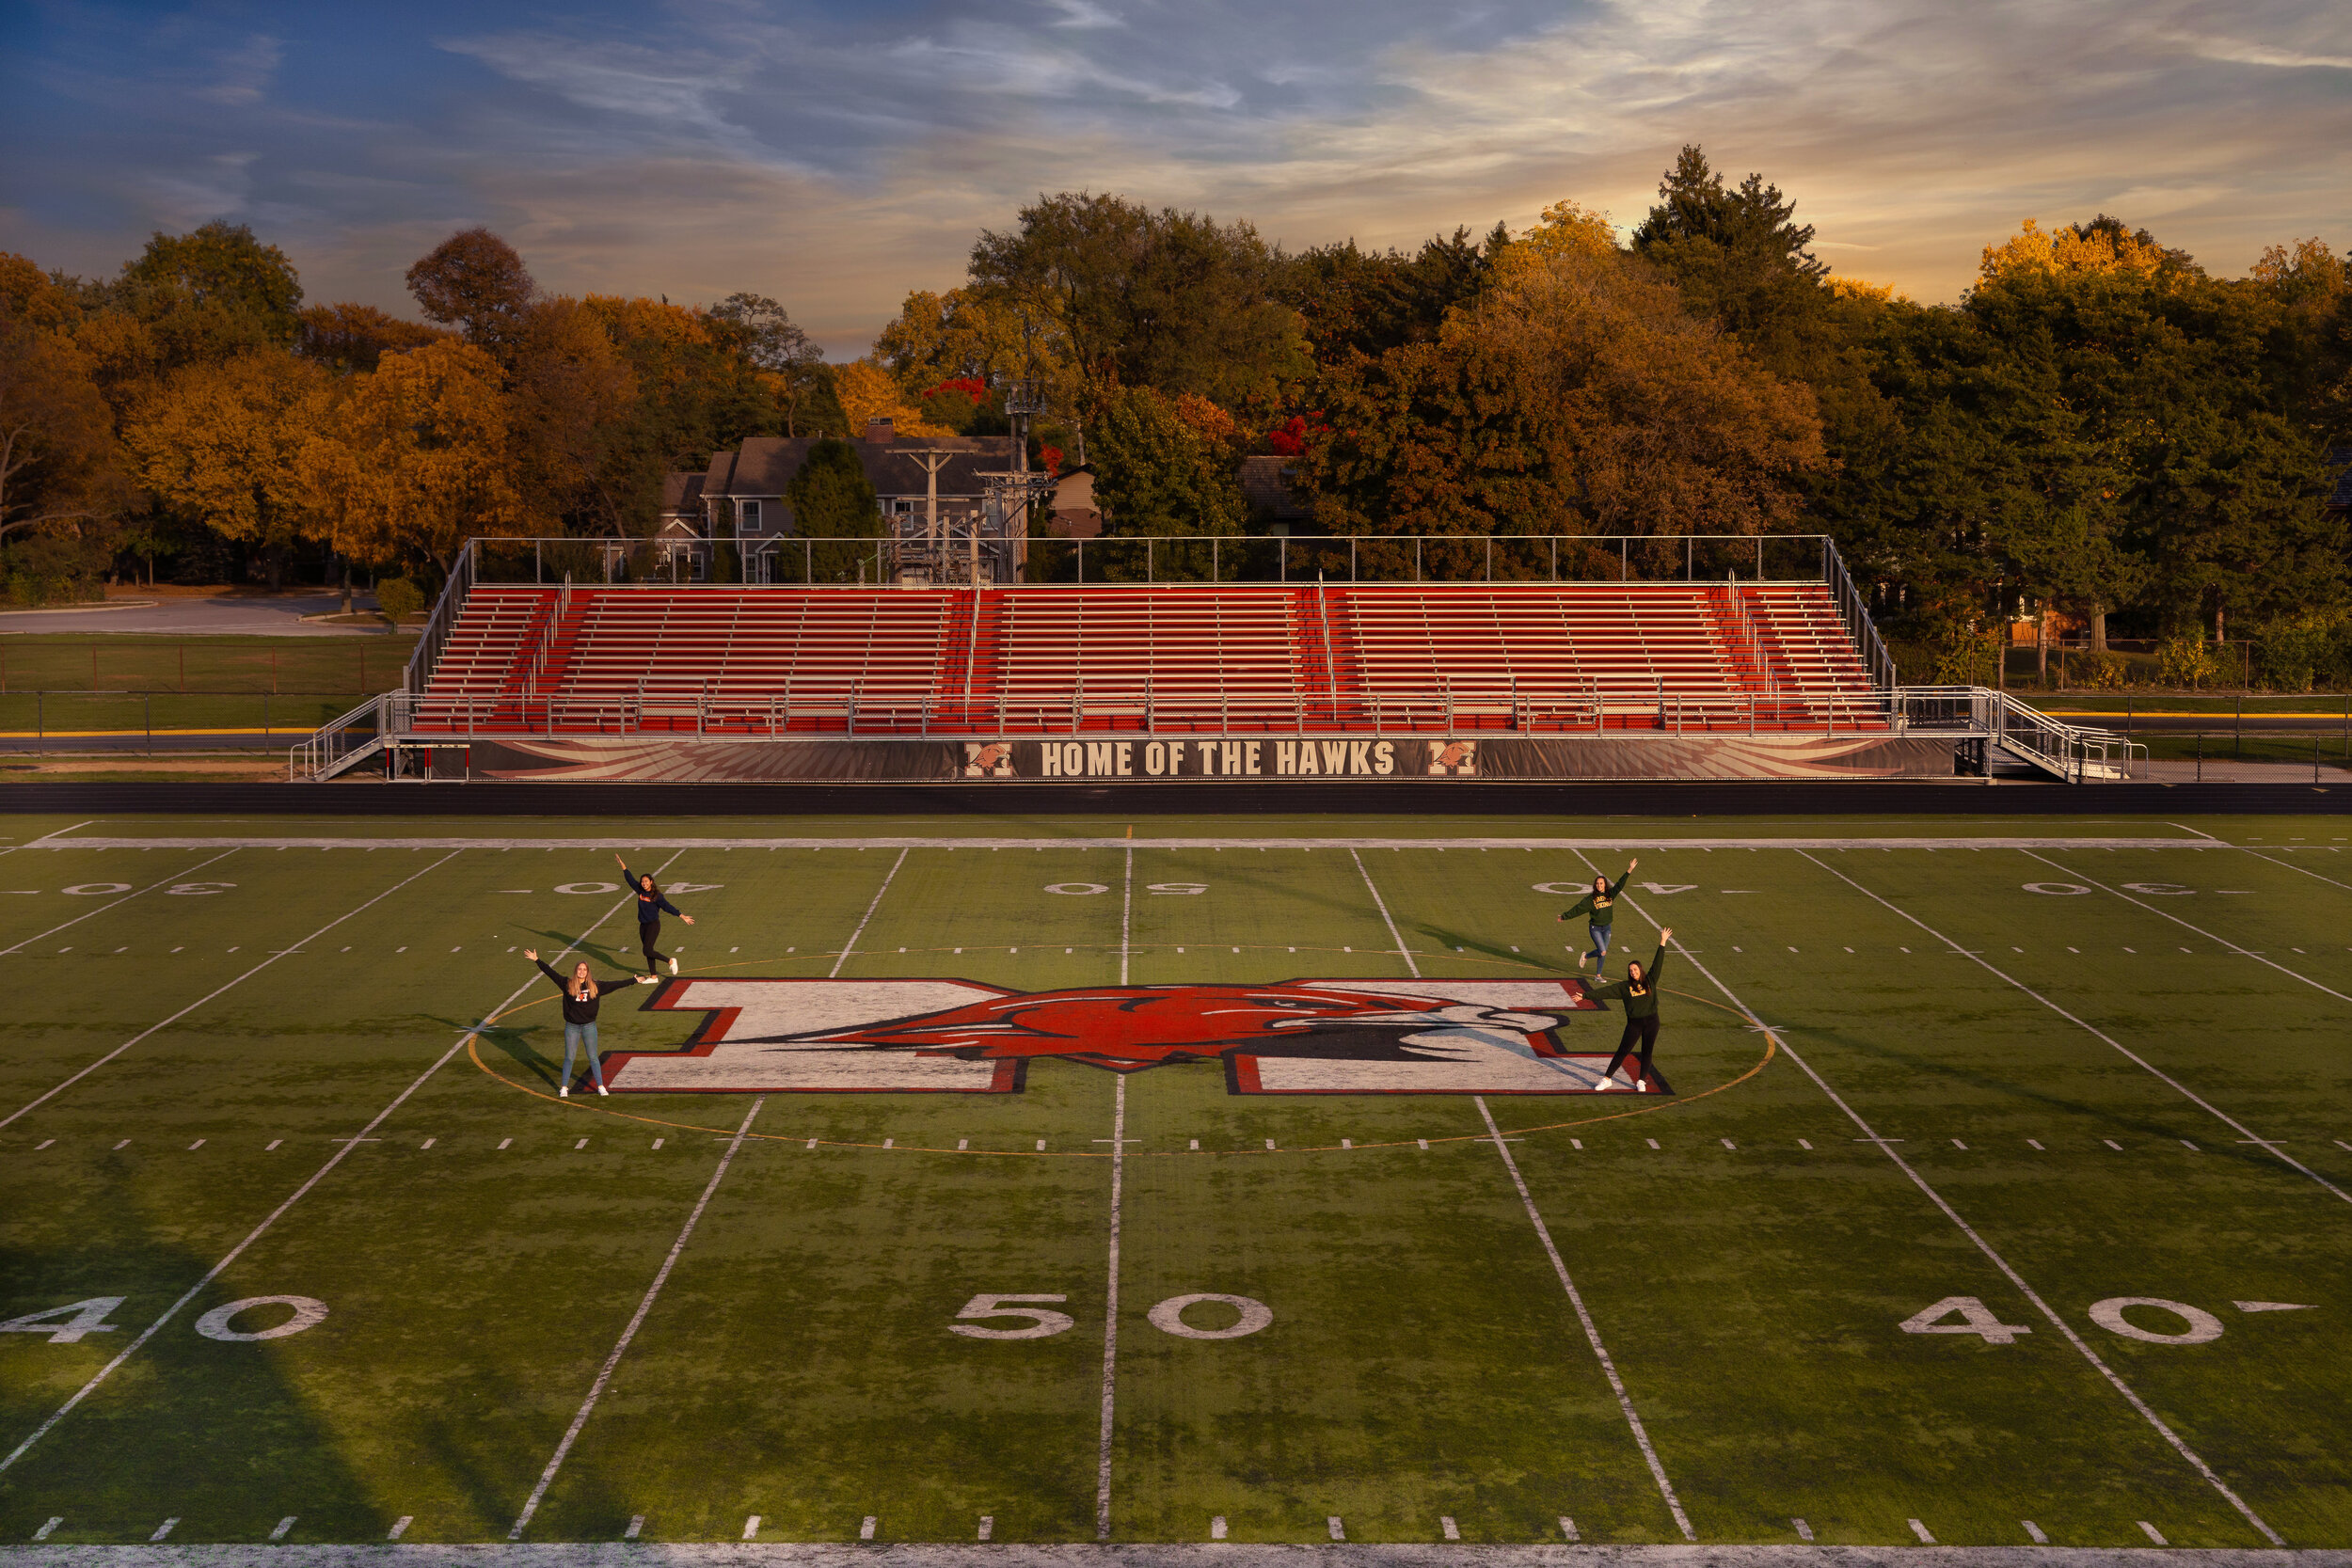 Senior Pictures Chicago Maine South High School Football Field at Sunset